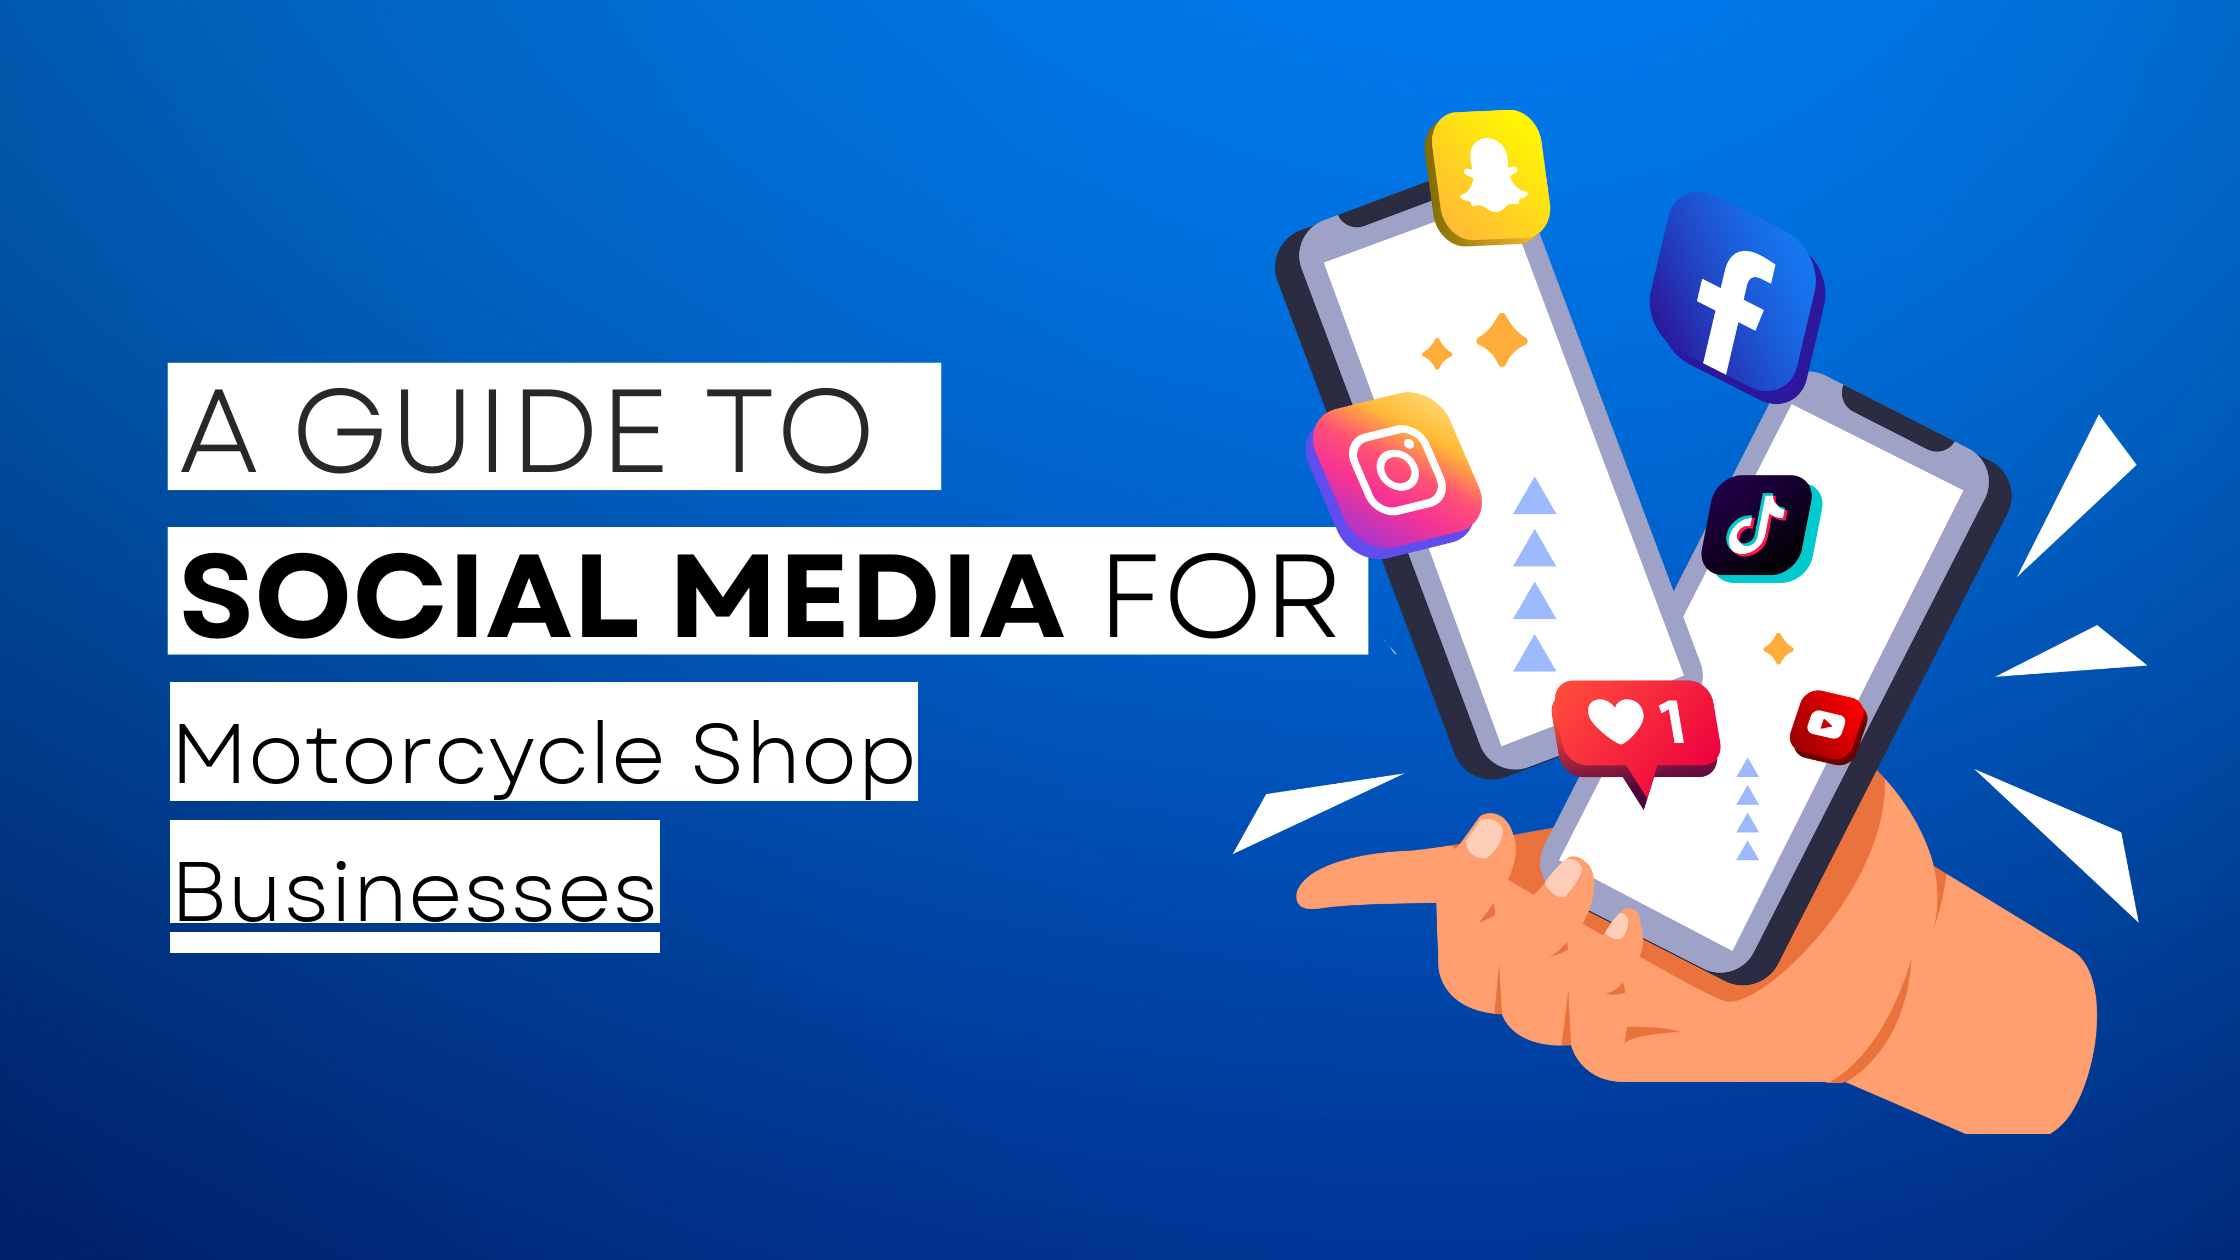 How to start Motorcycle Shop  on social media